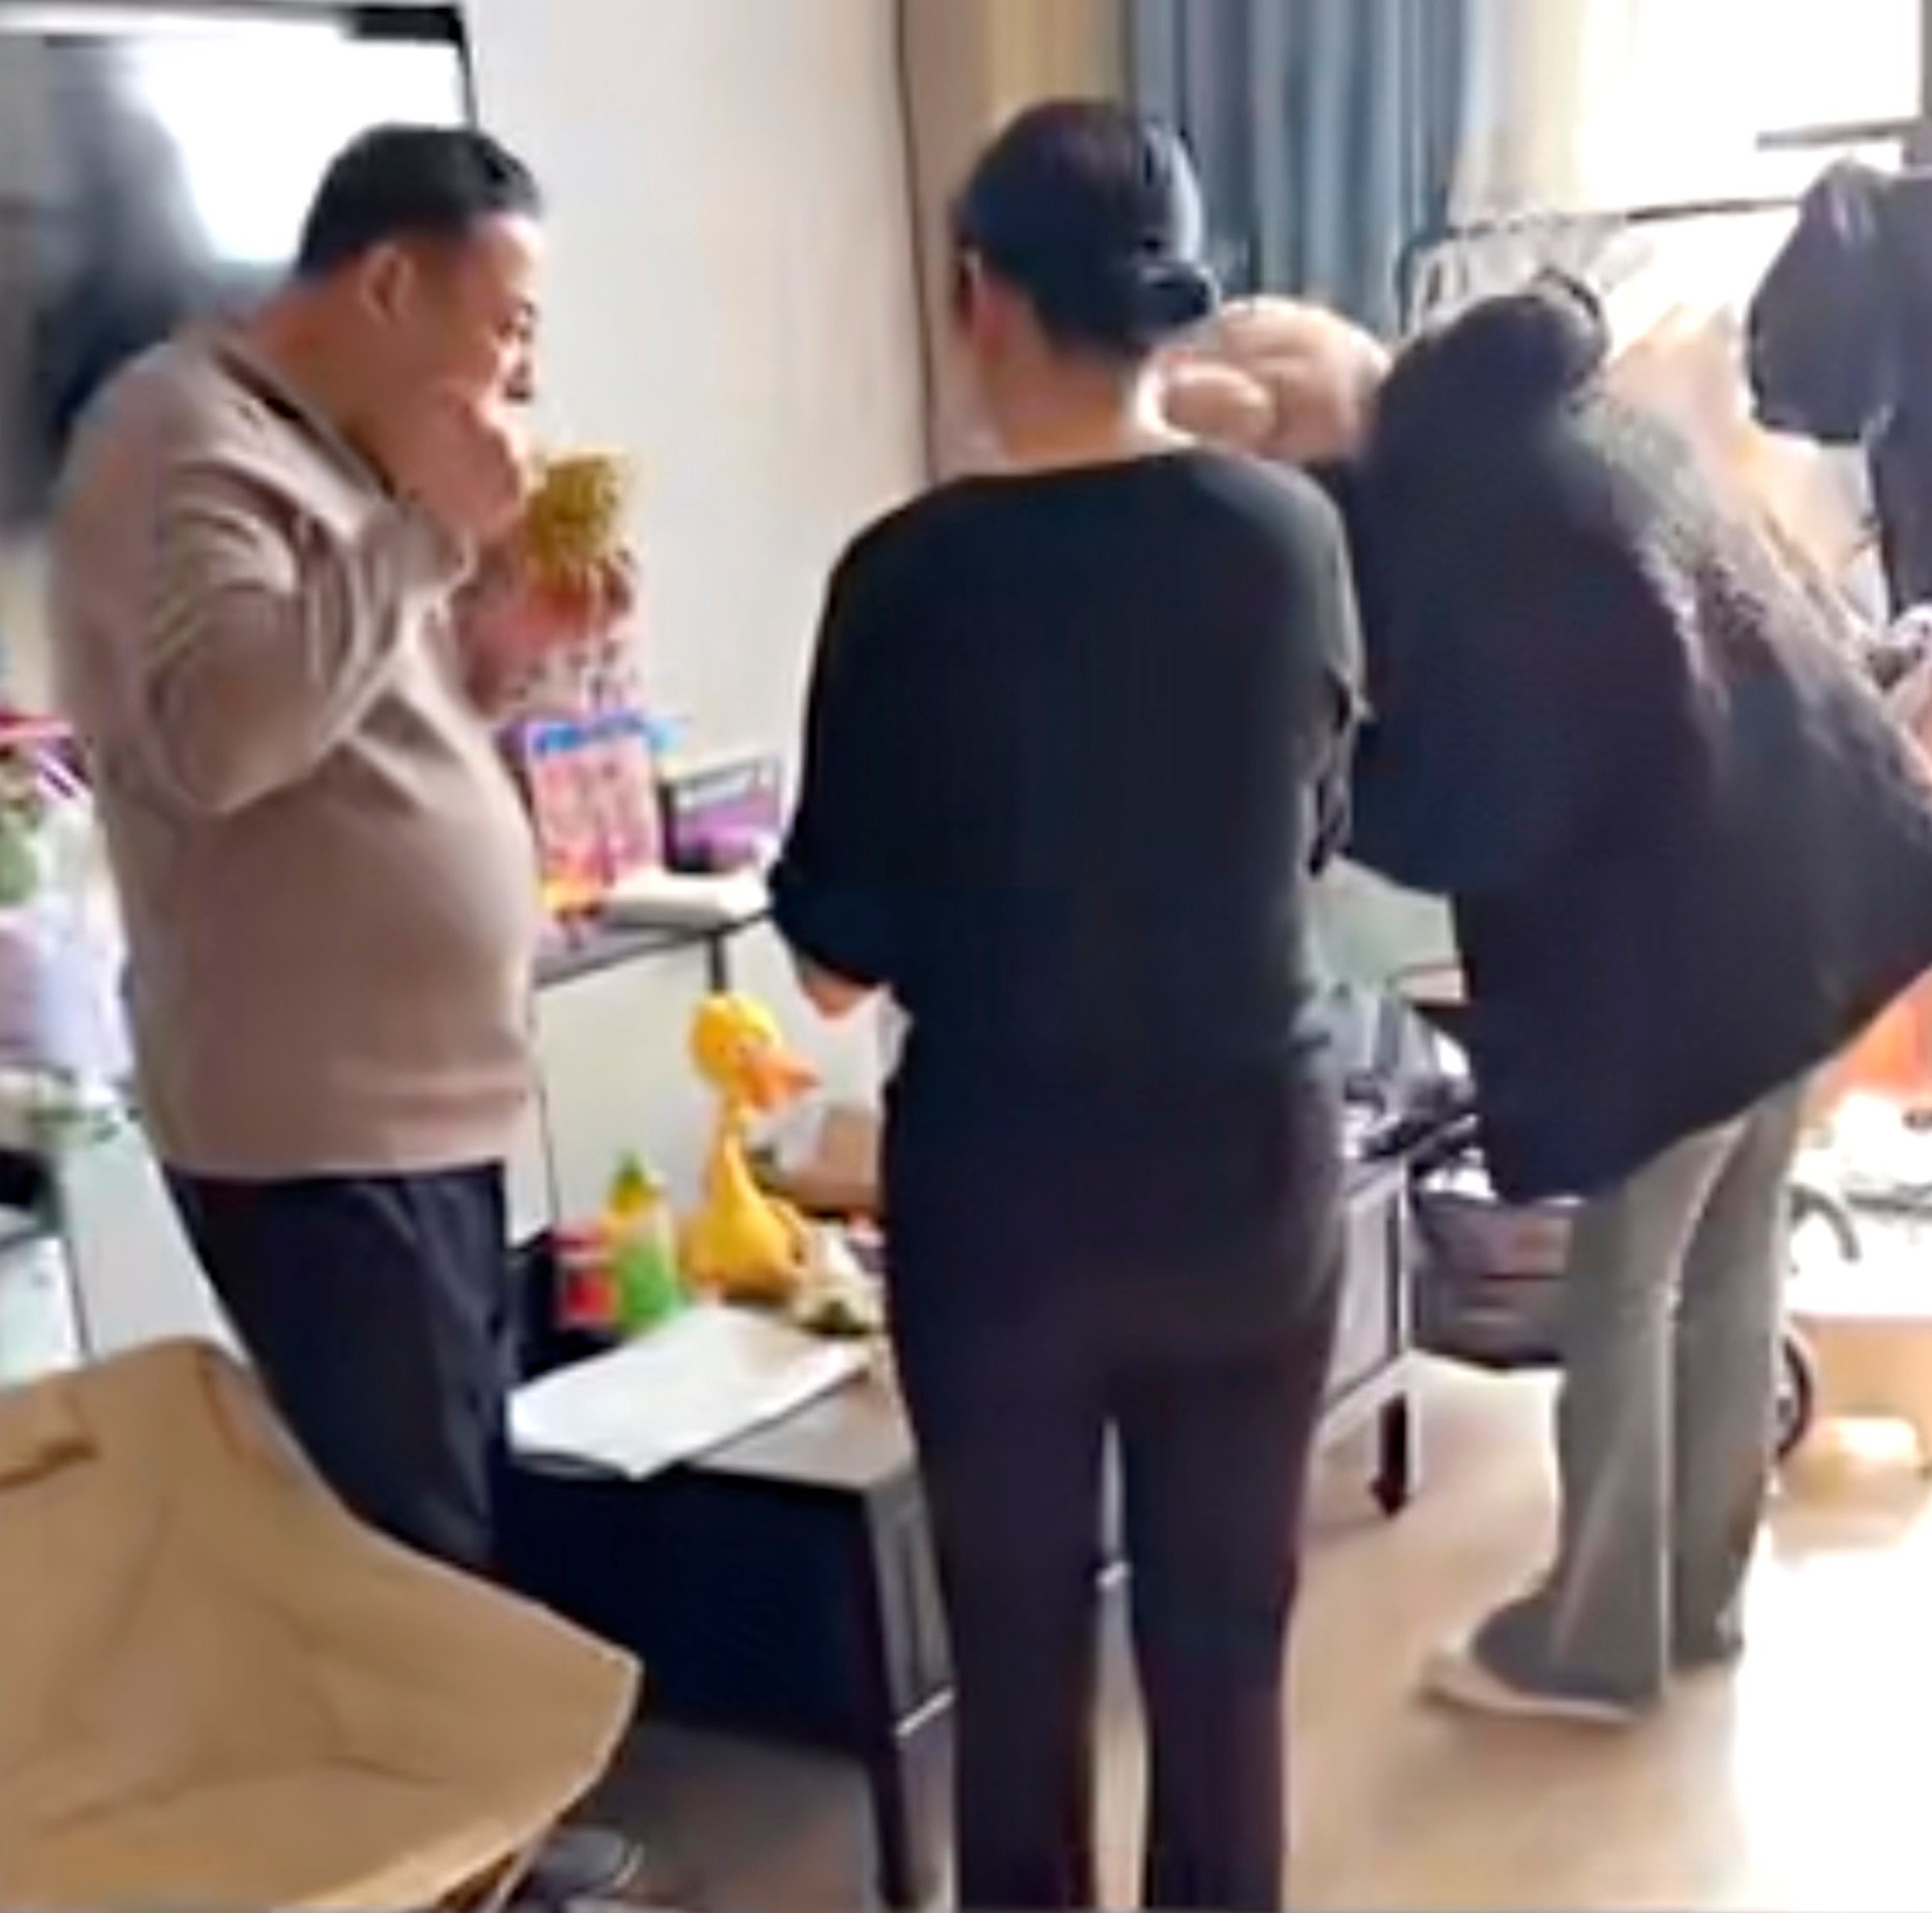 High life: China family of 8 pays US$140 a day to live in luxury hotel, saying price and comfort mean they might stay forever